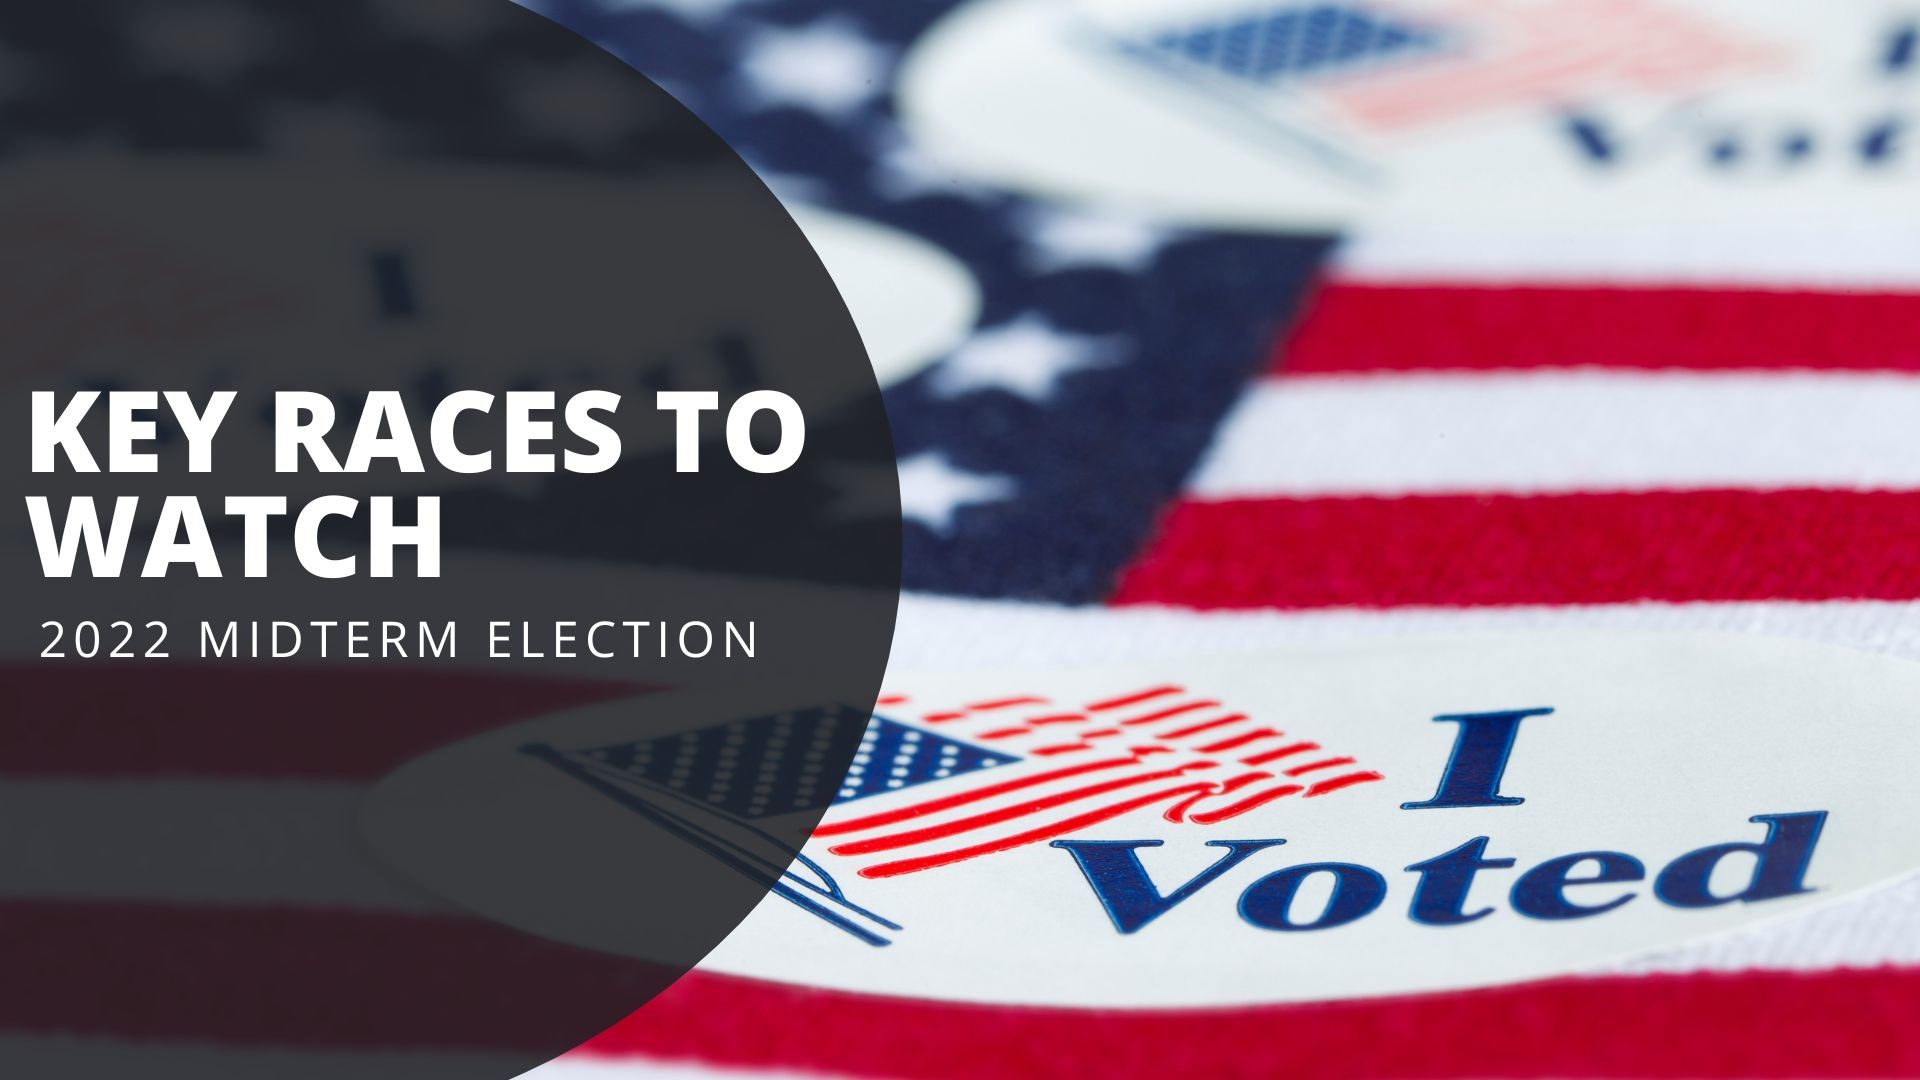 The key races to watch for in the 2022 midterm elections, from governor races to control of the House and Senate, we break down the most contested races.